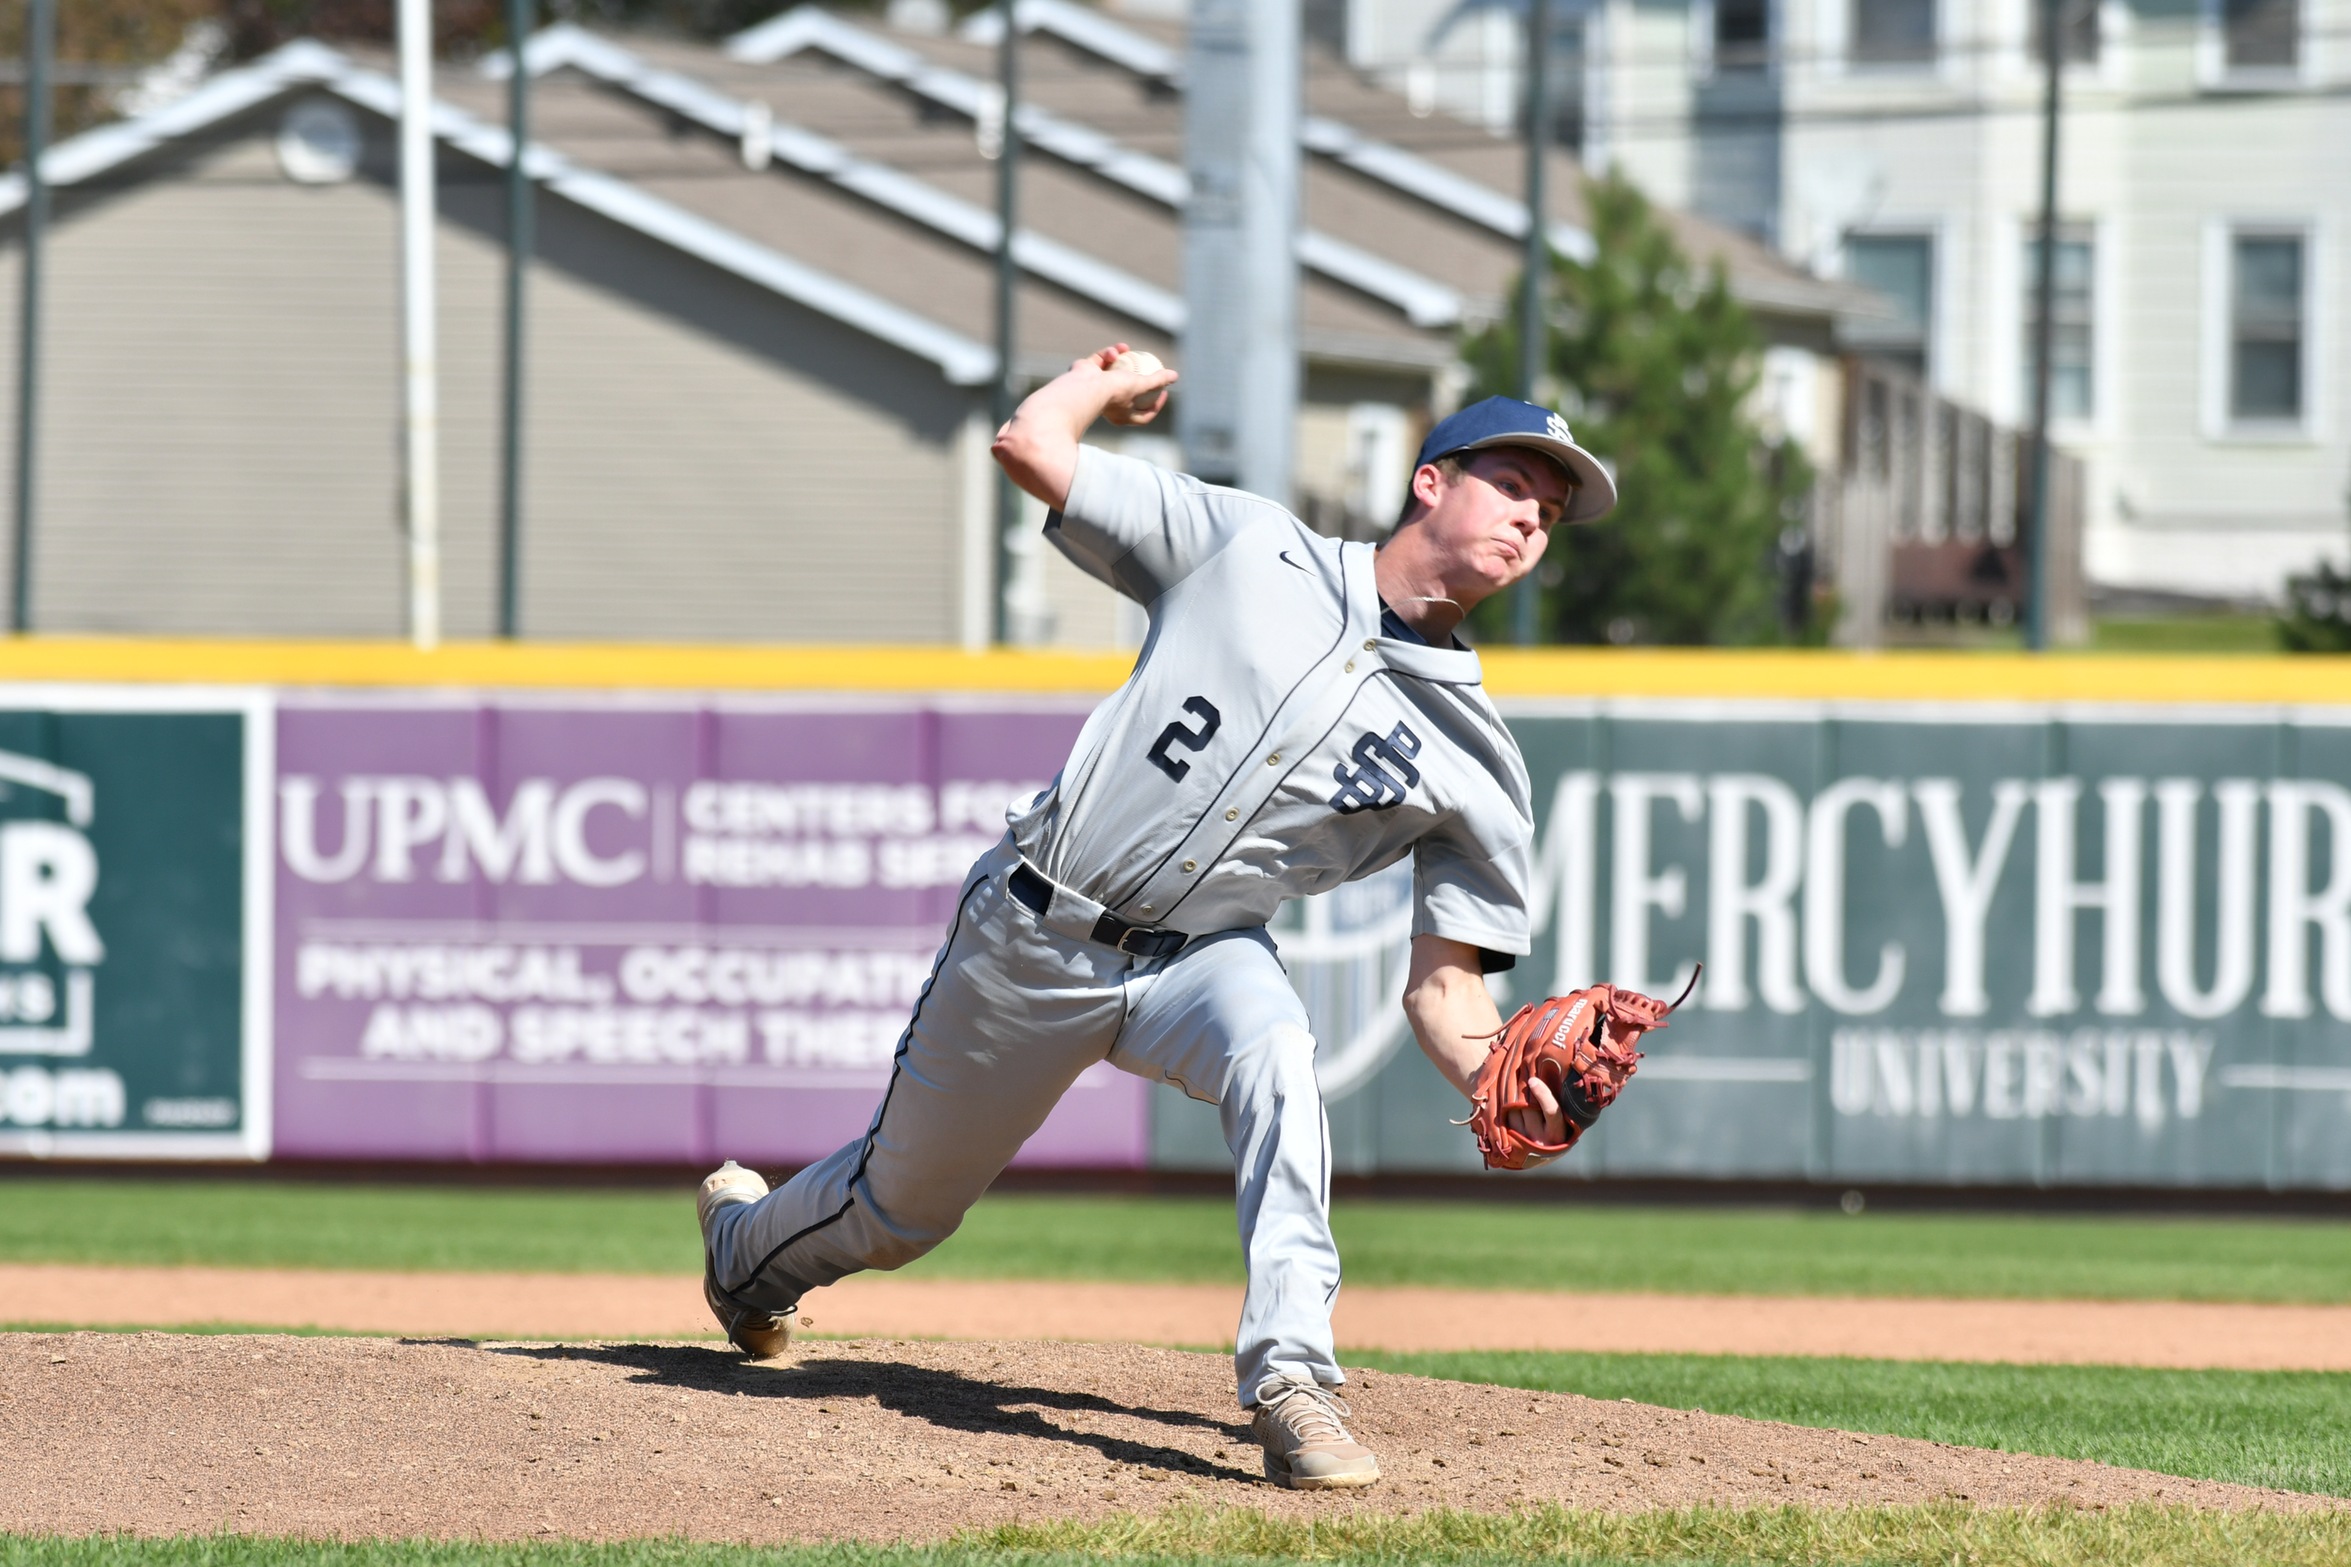 Behrend Drops First of Three in Ninth Inning Walk-Off